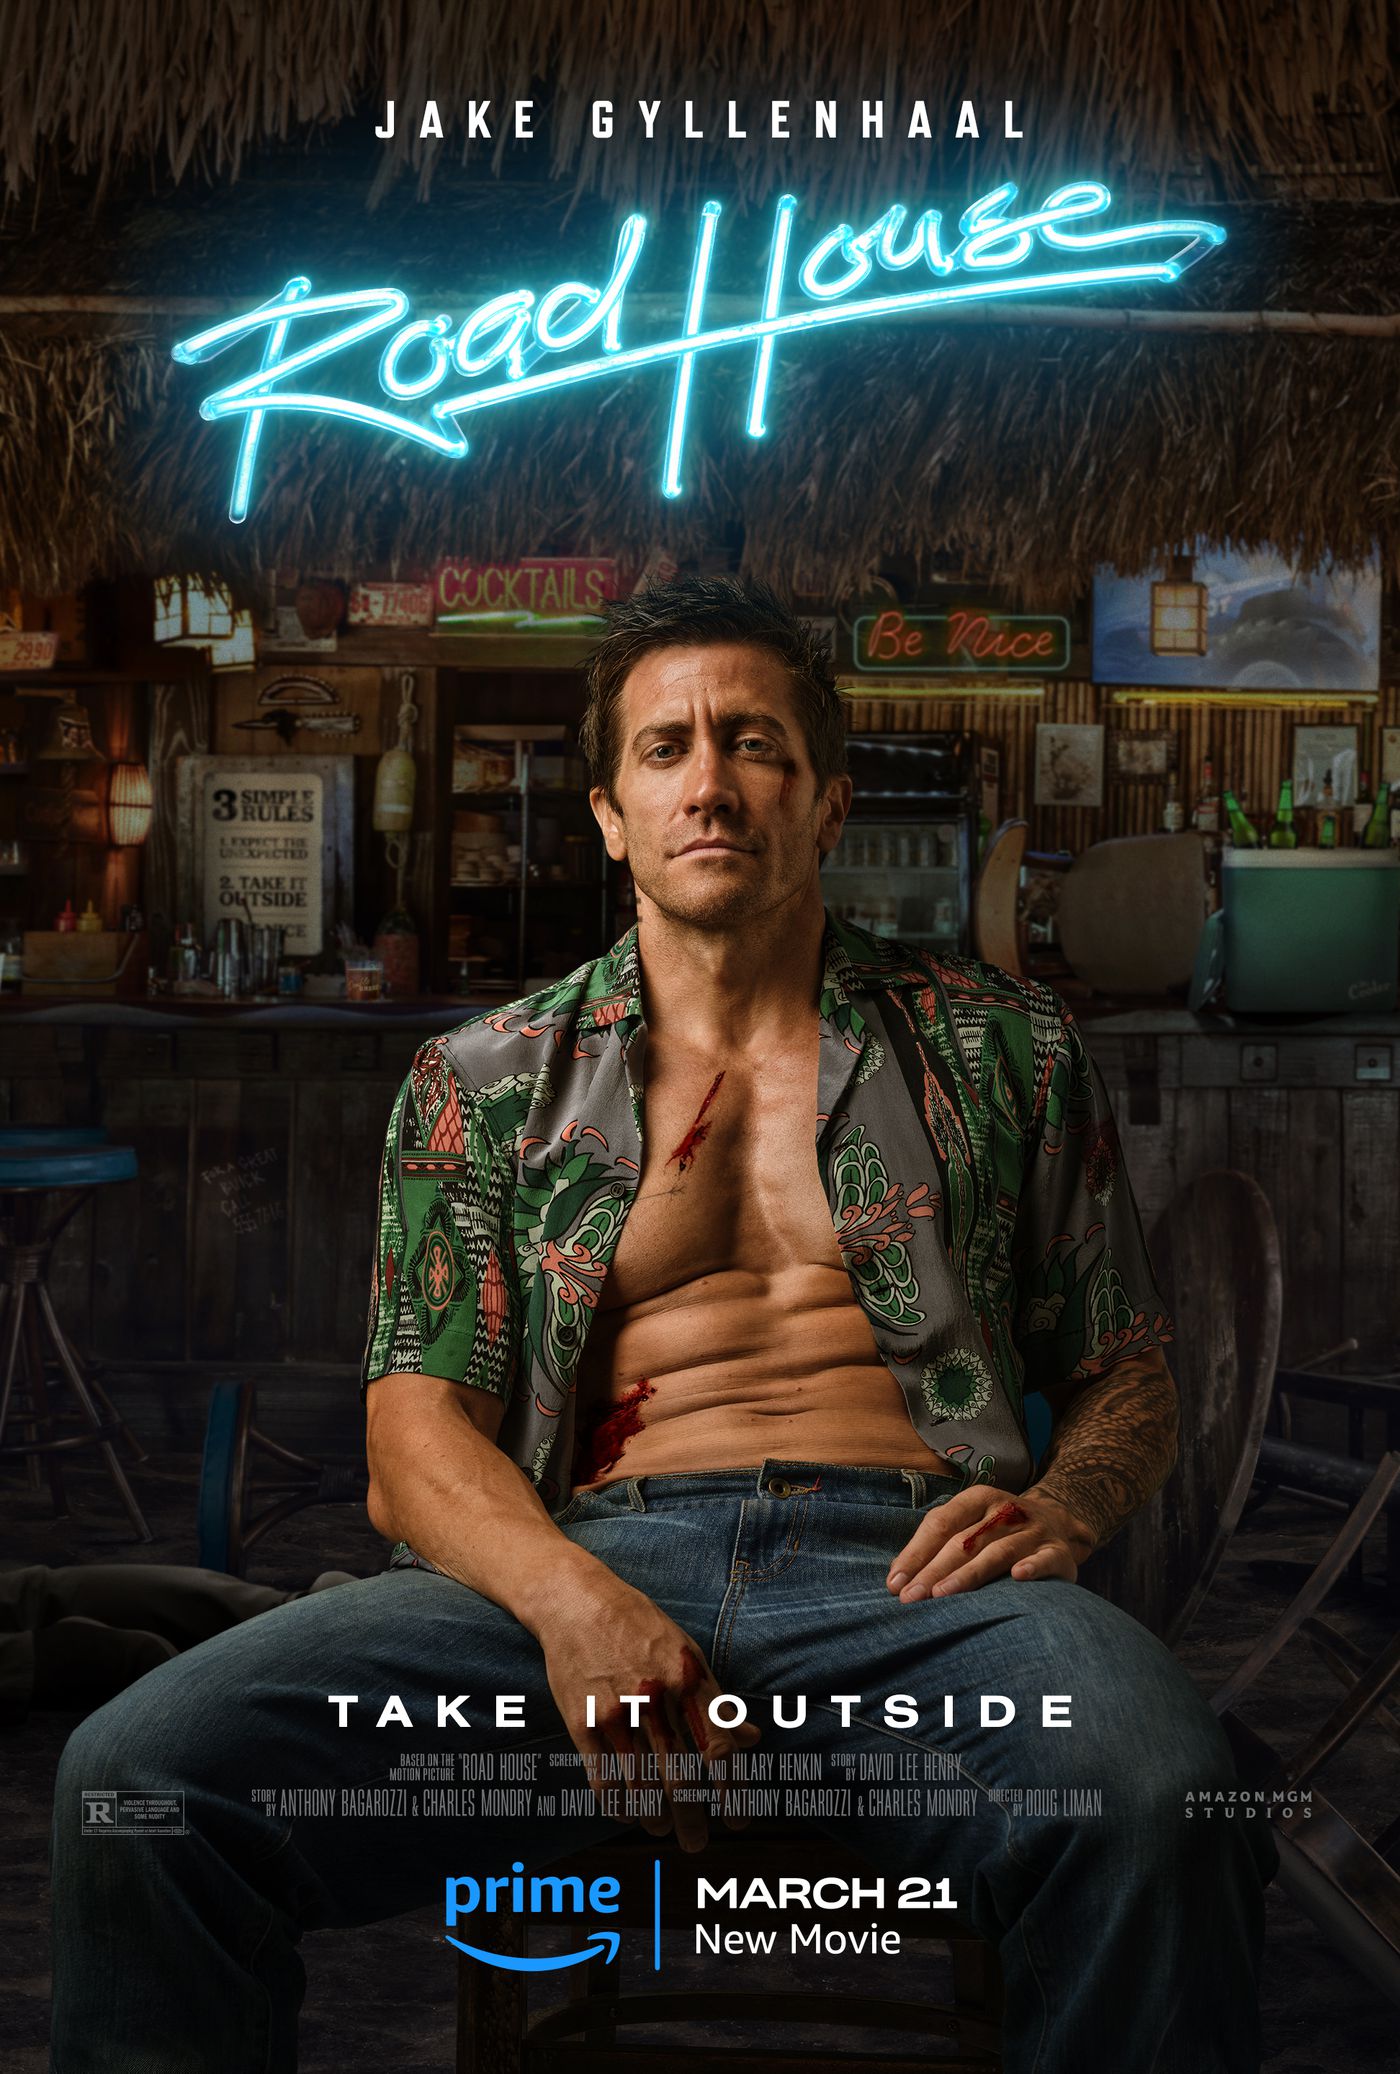 amazon, ‘road house’ remake starring conor mcgregor sets march release date, new poster unveiled